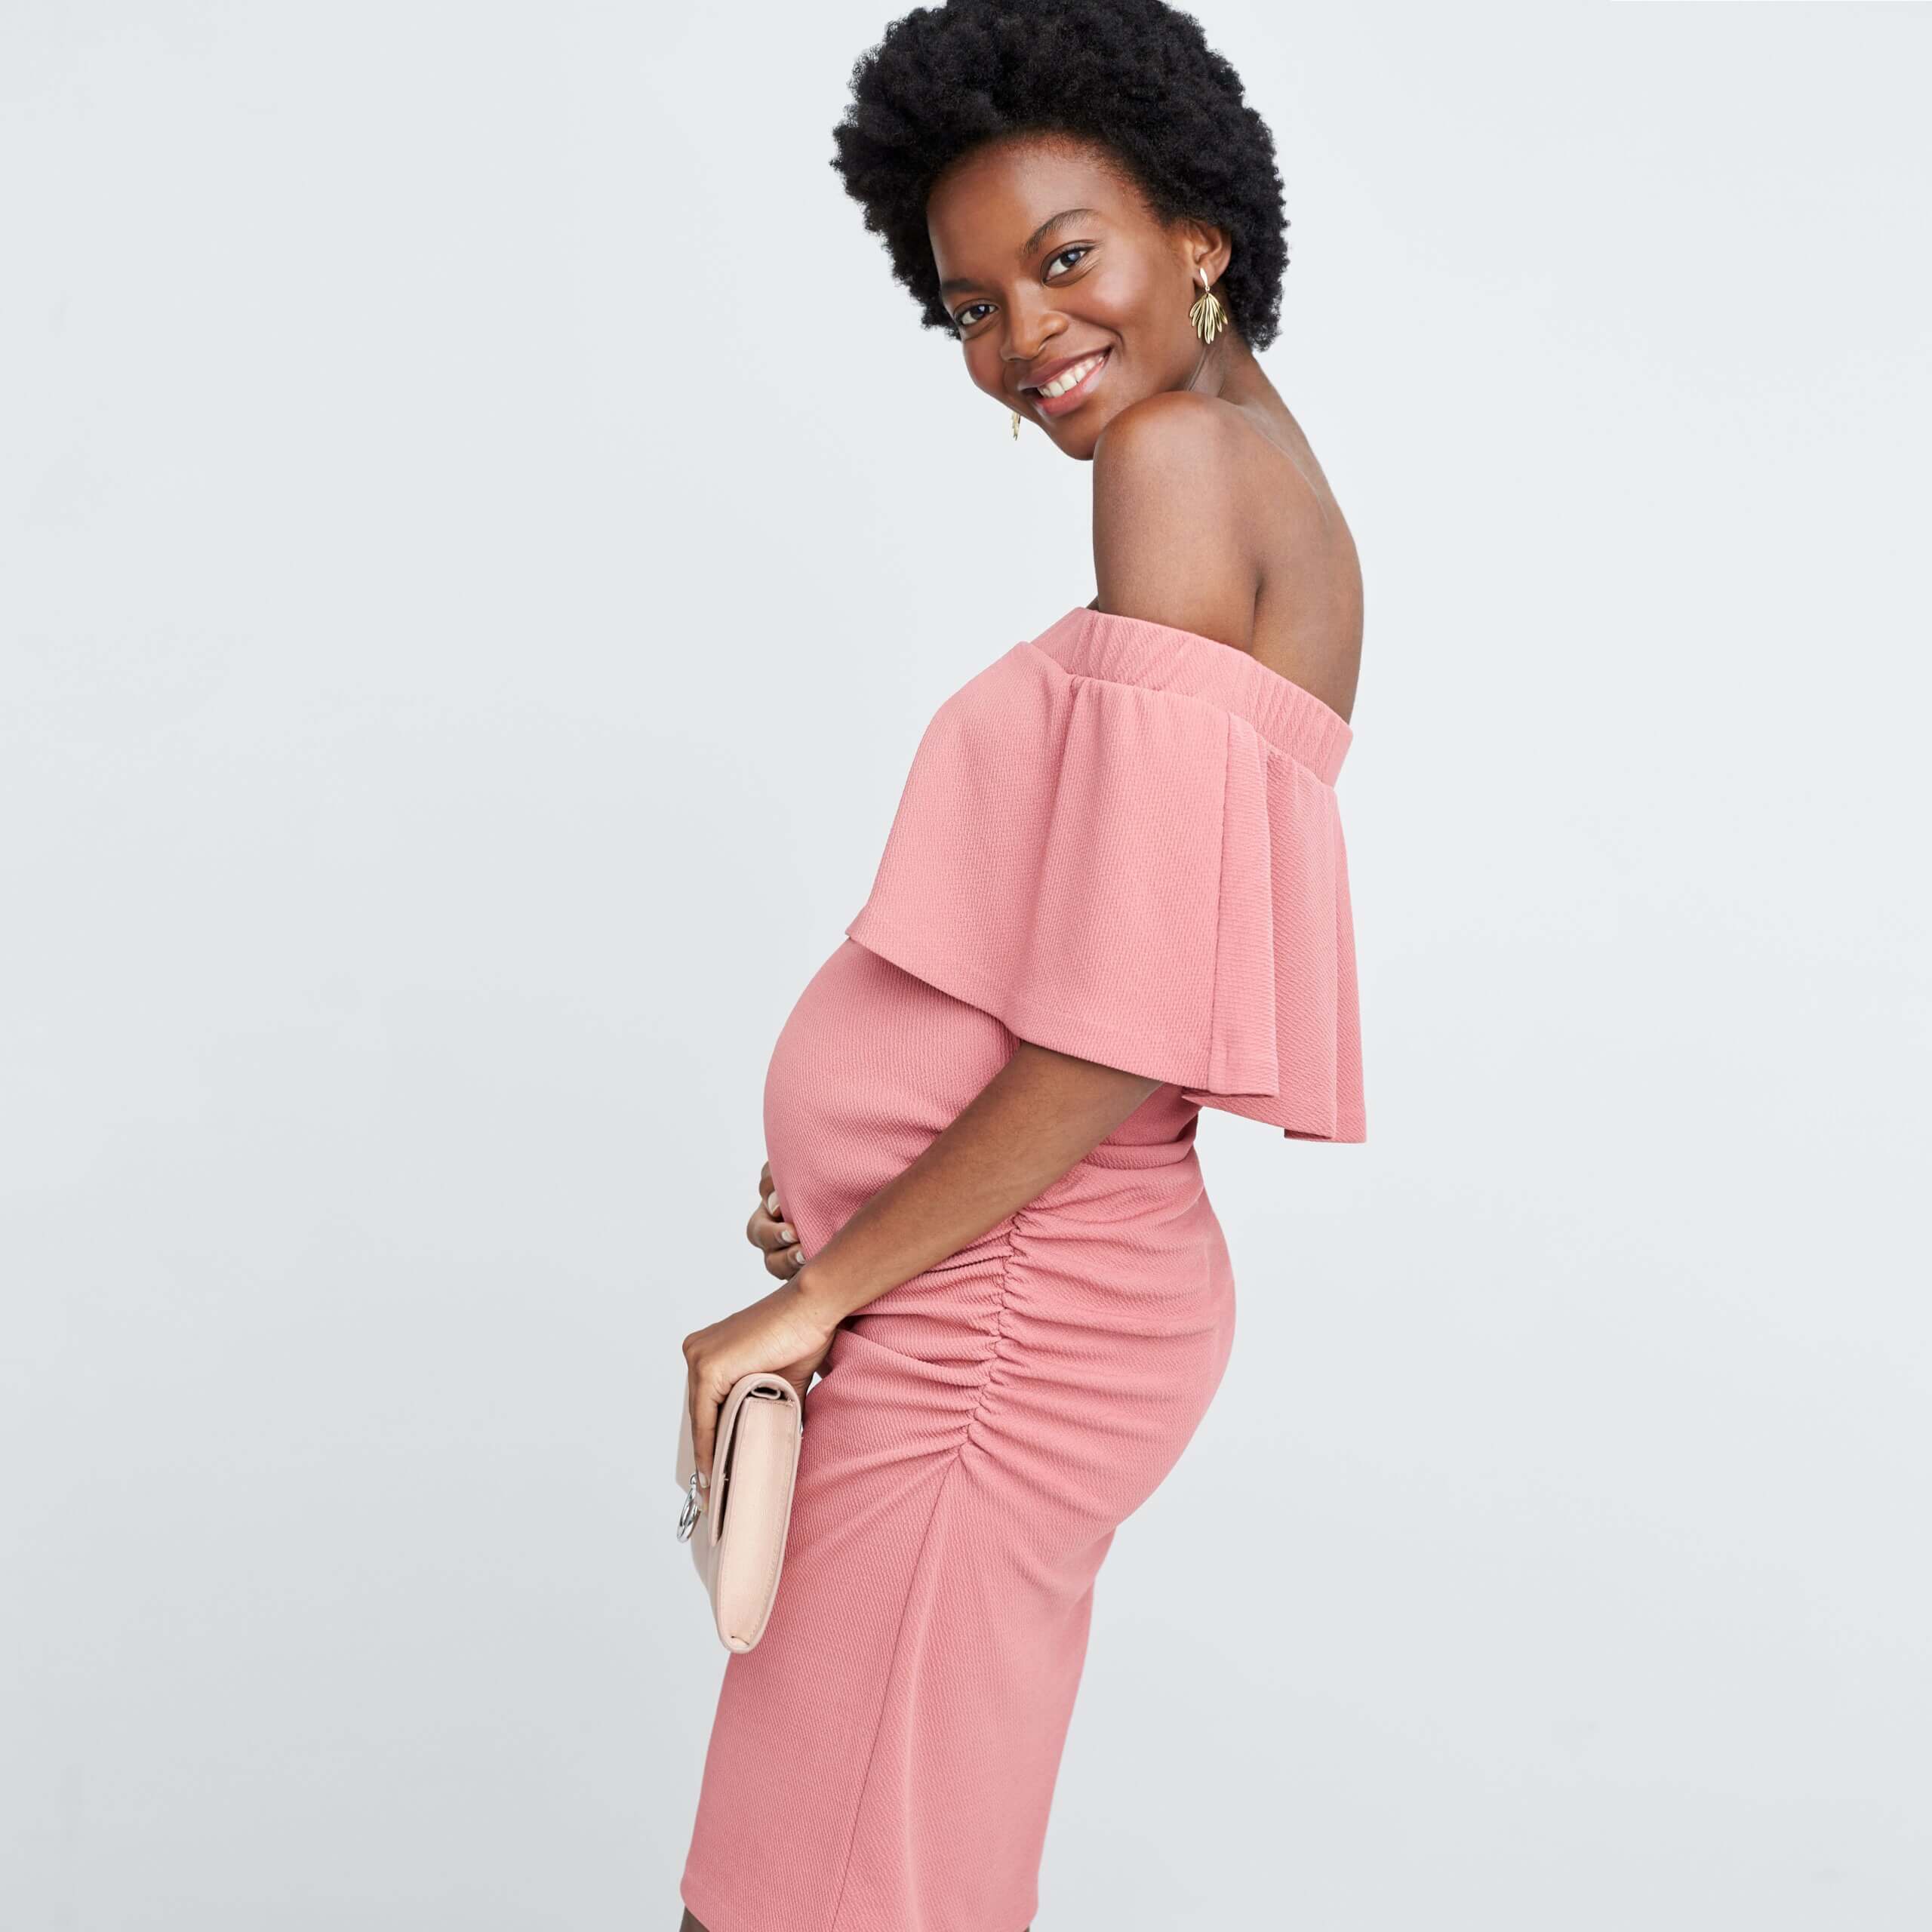 How To Avoid Buying Maternity Clothes - You Don't Need Them! - The